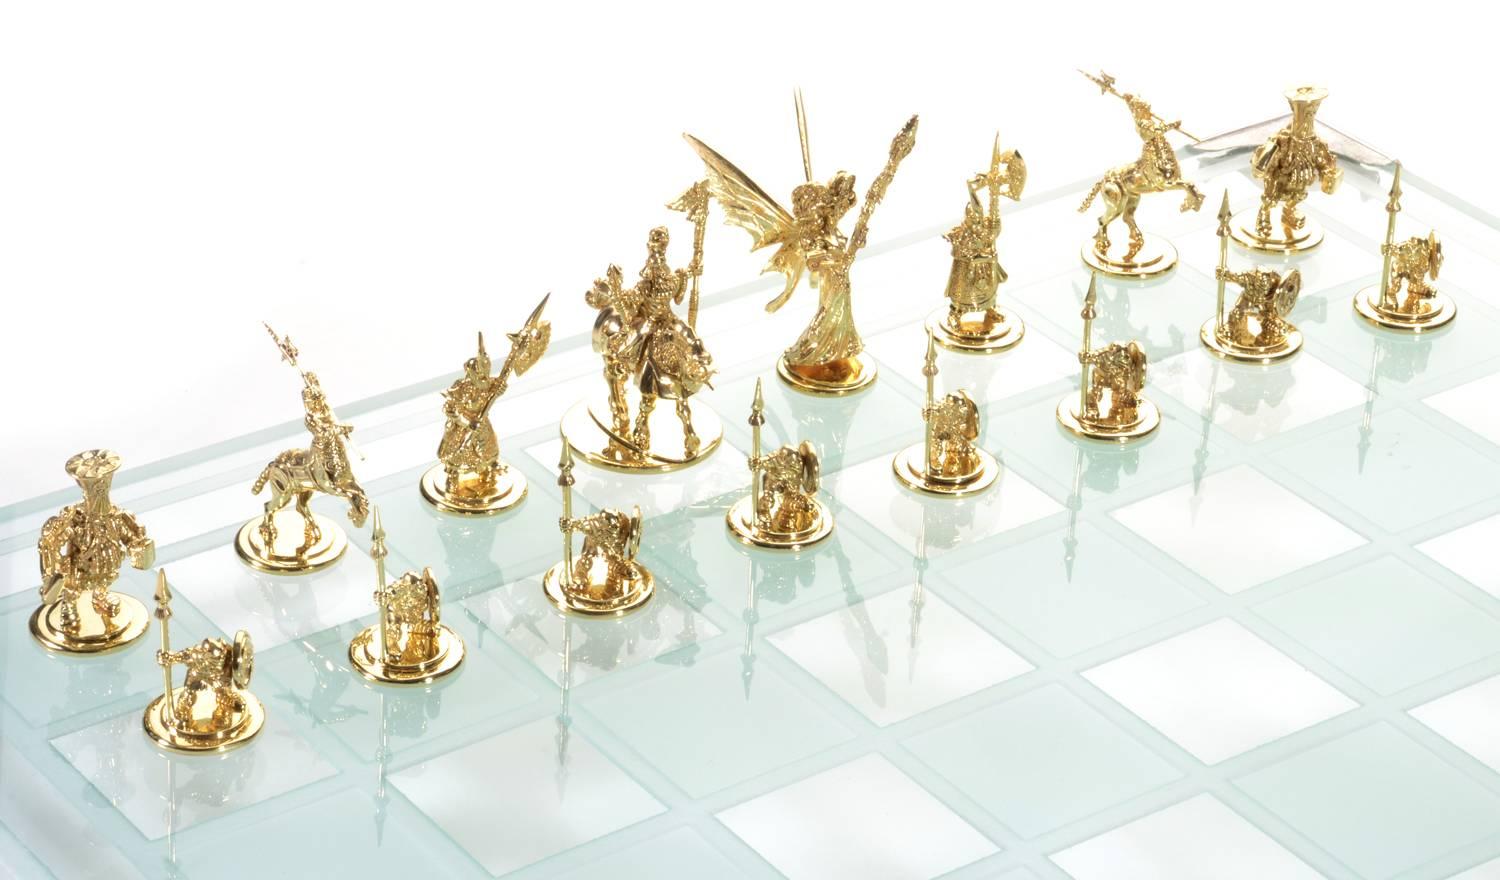 The foremost game of strategy unfolds between the most fantastic cast of characters with this unique and stunning handmade, custom designed chess set. Consider first the sheer weight of gold dedicated to this design; 62.2 grams shape the corners,